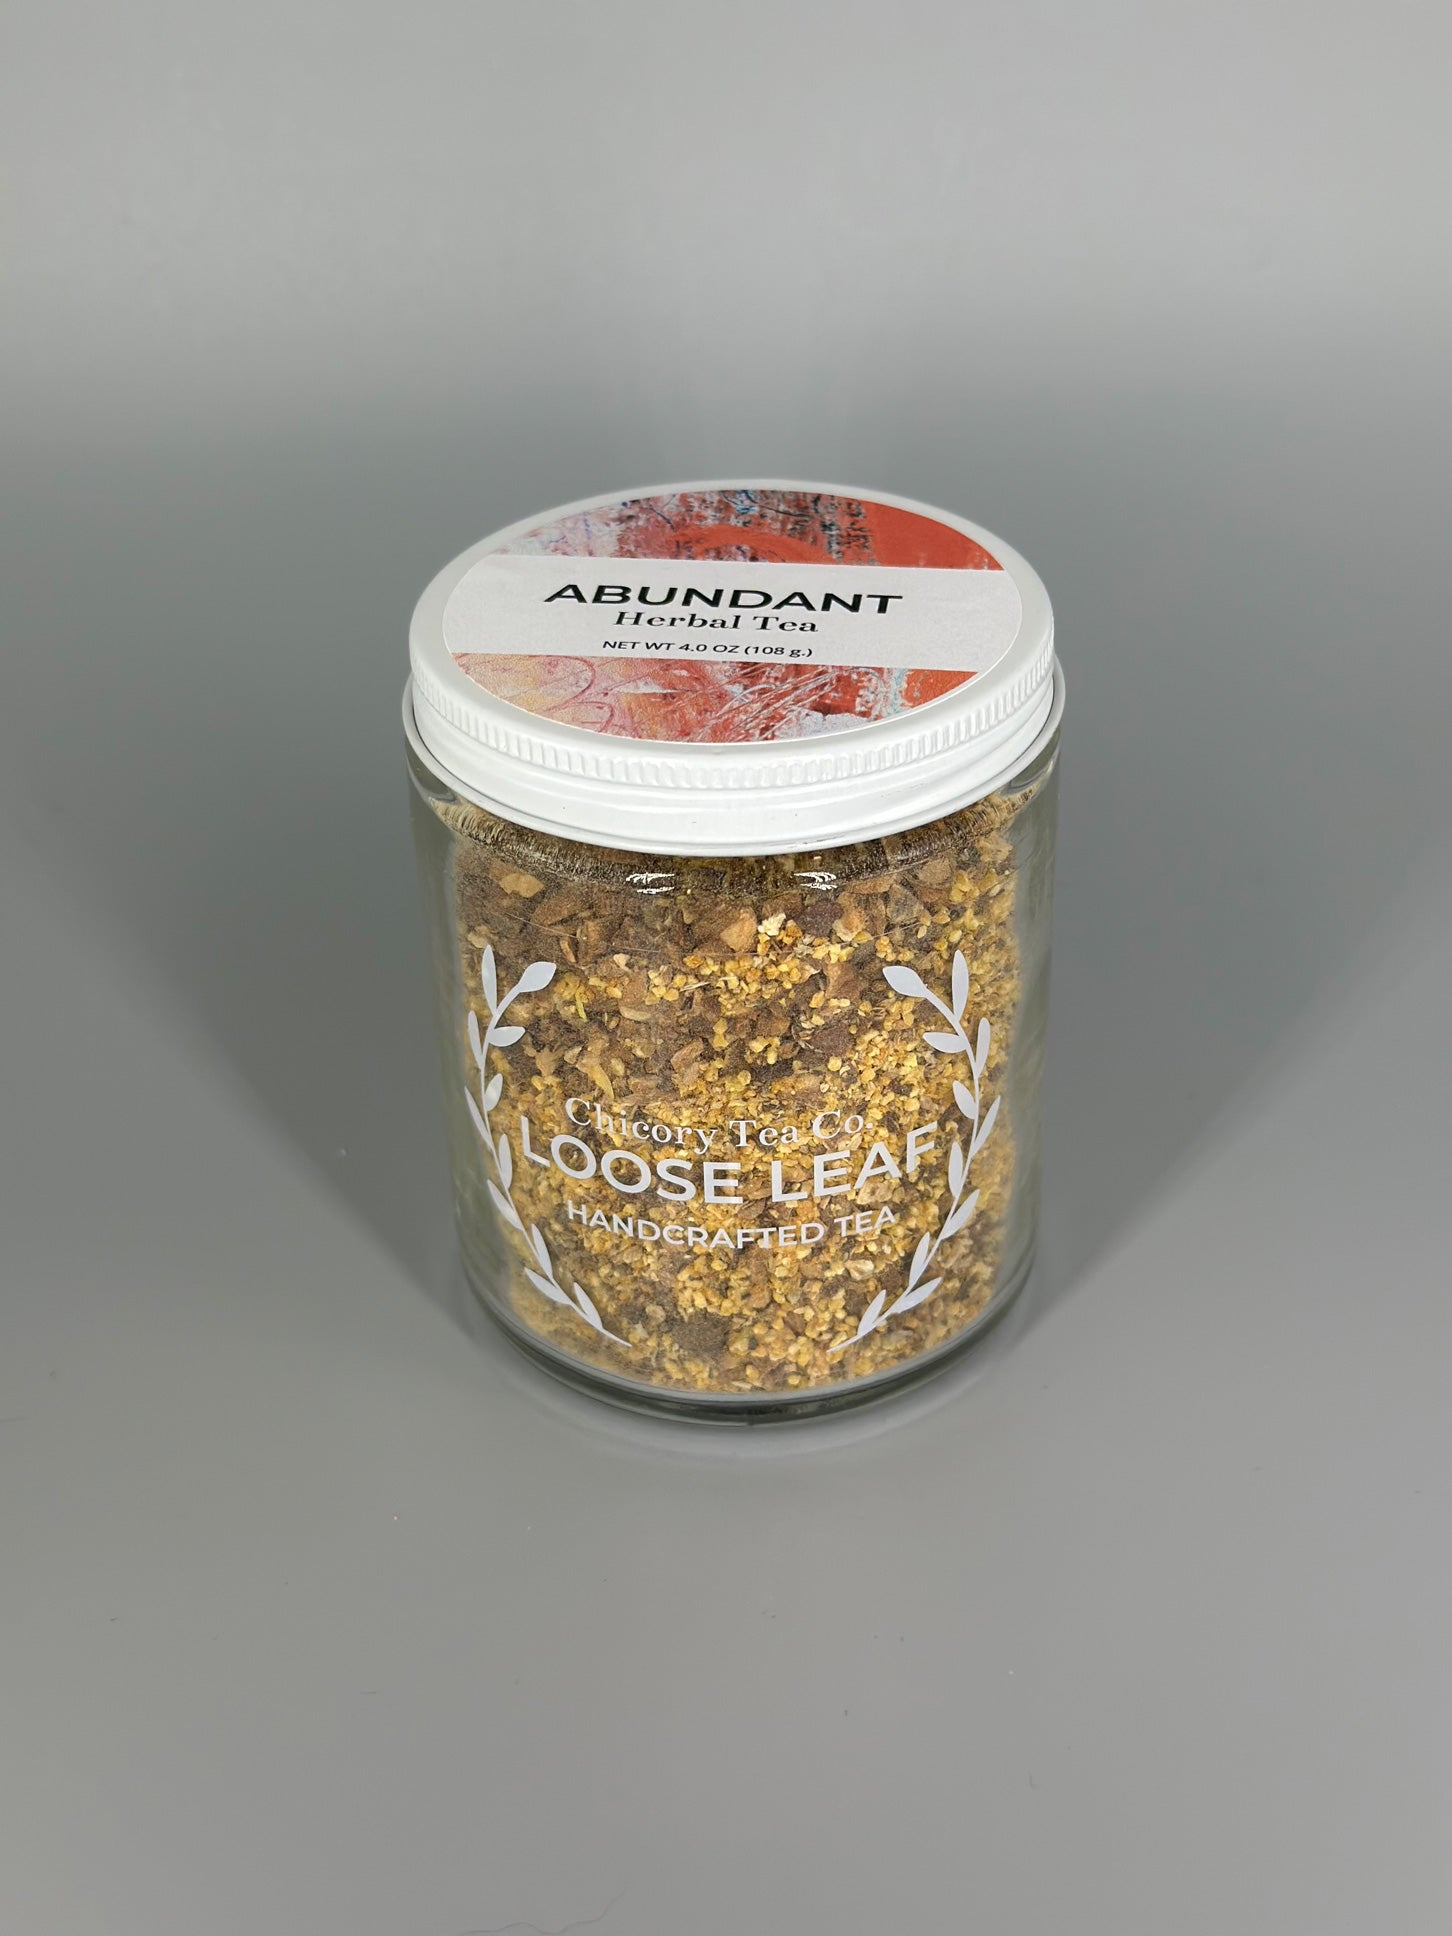 Chicory Tea Co.'s Abundant Herbal Tea in the jar, view from front